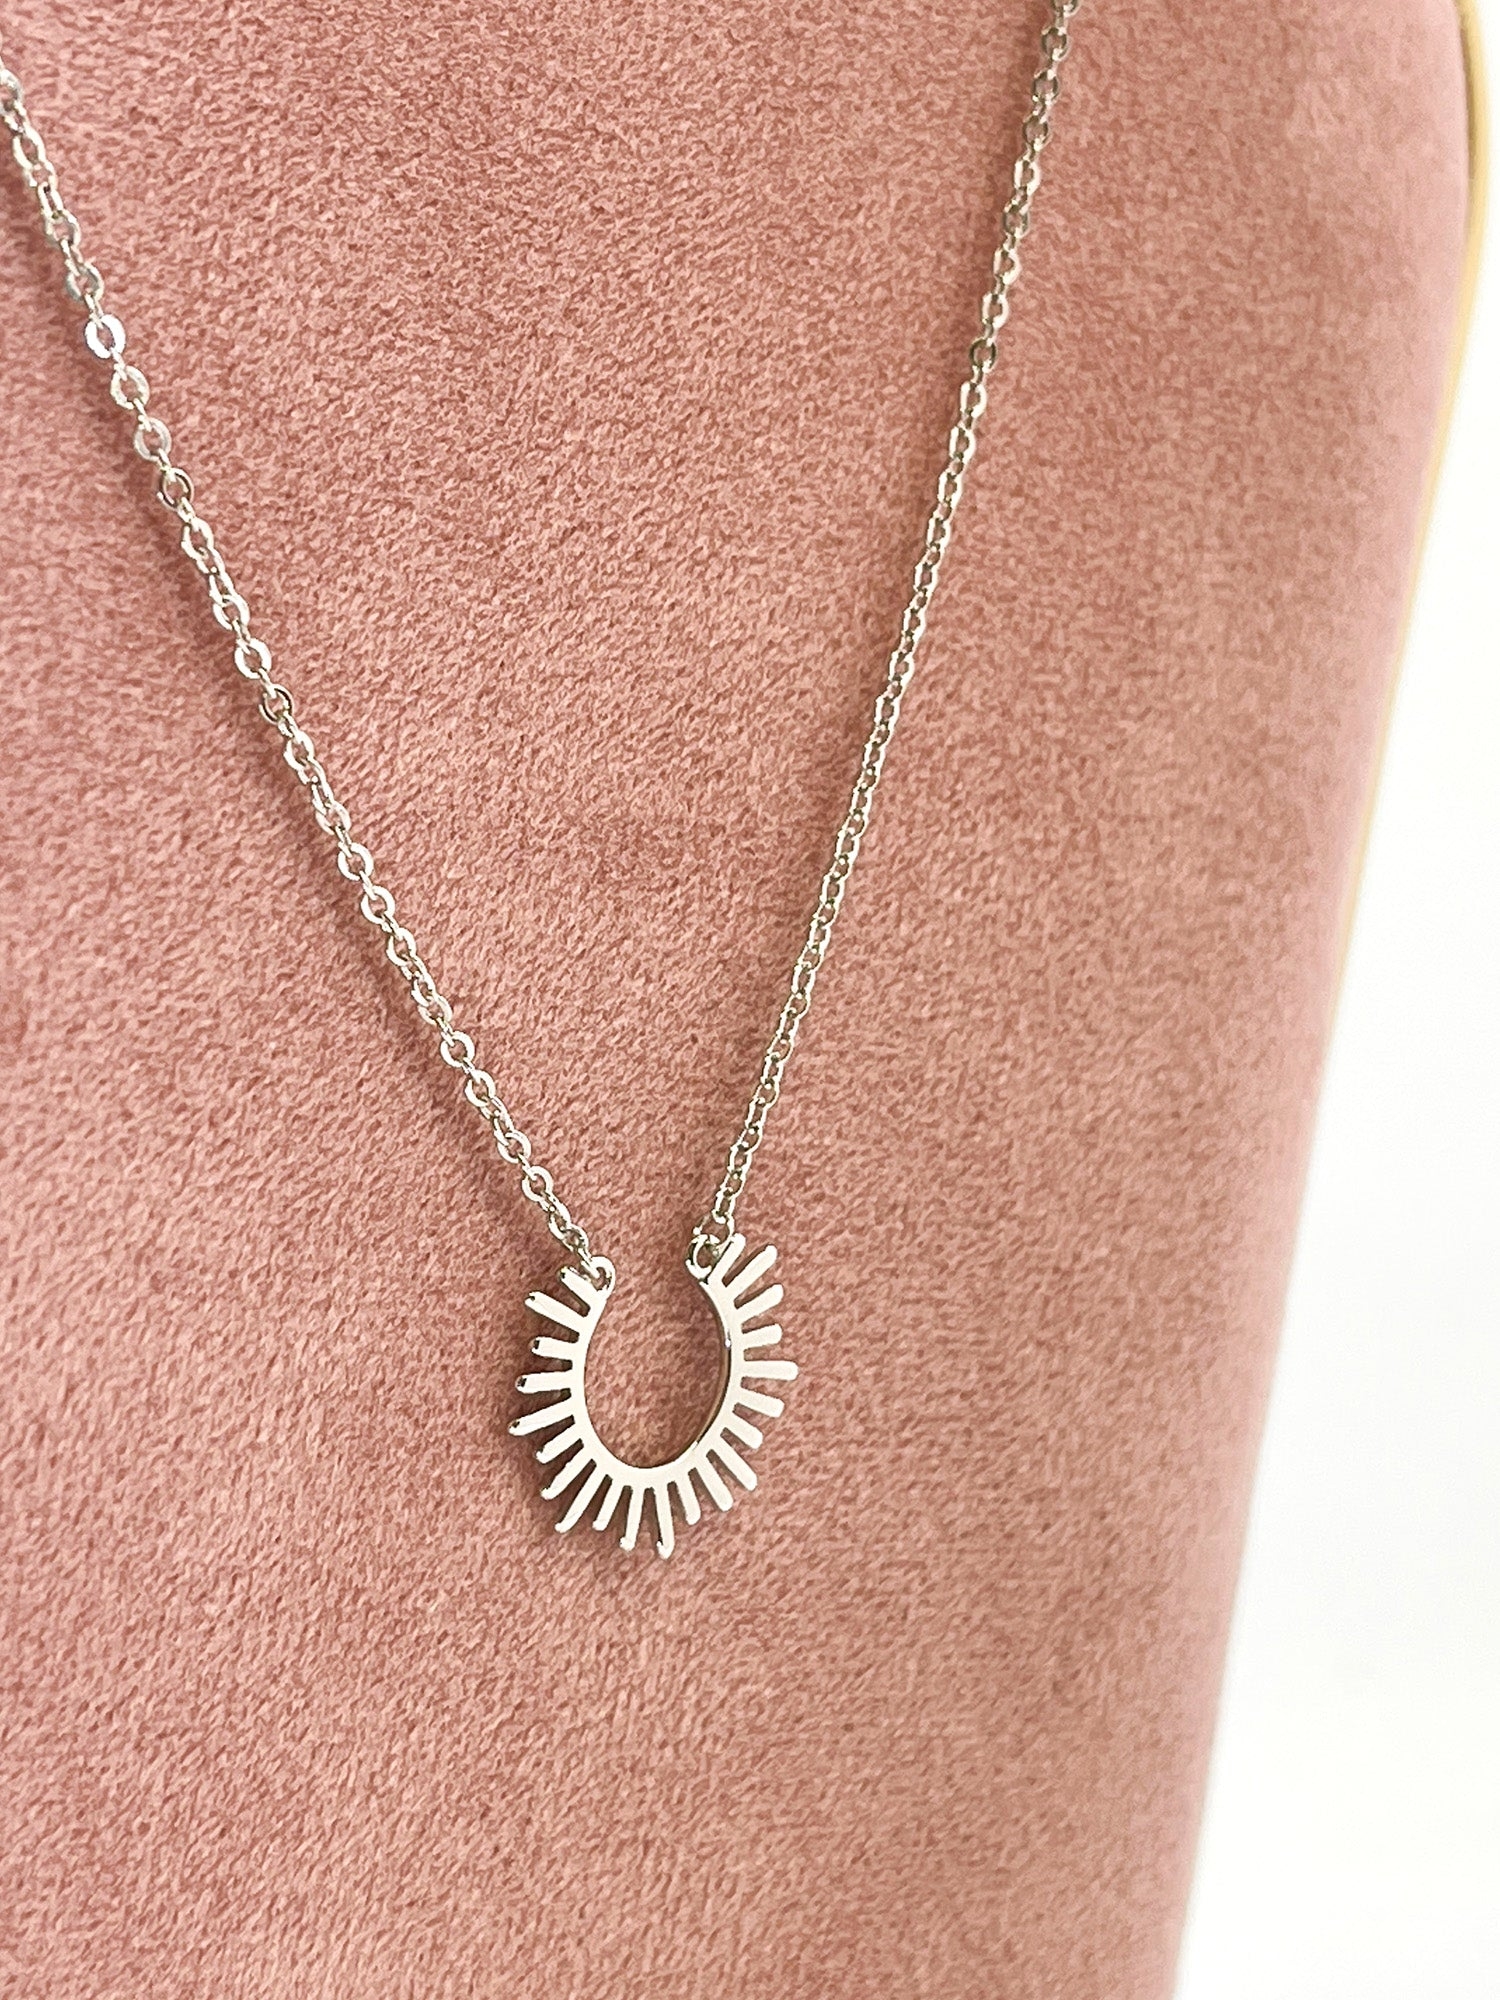 Bspoiled Women’s Sun Burst Necklace 925 – Silver – BSpoiled